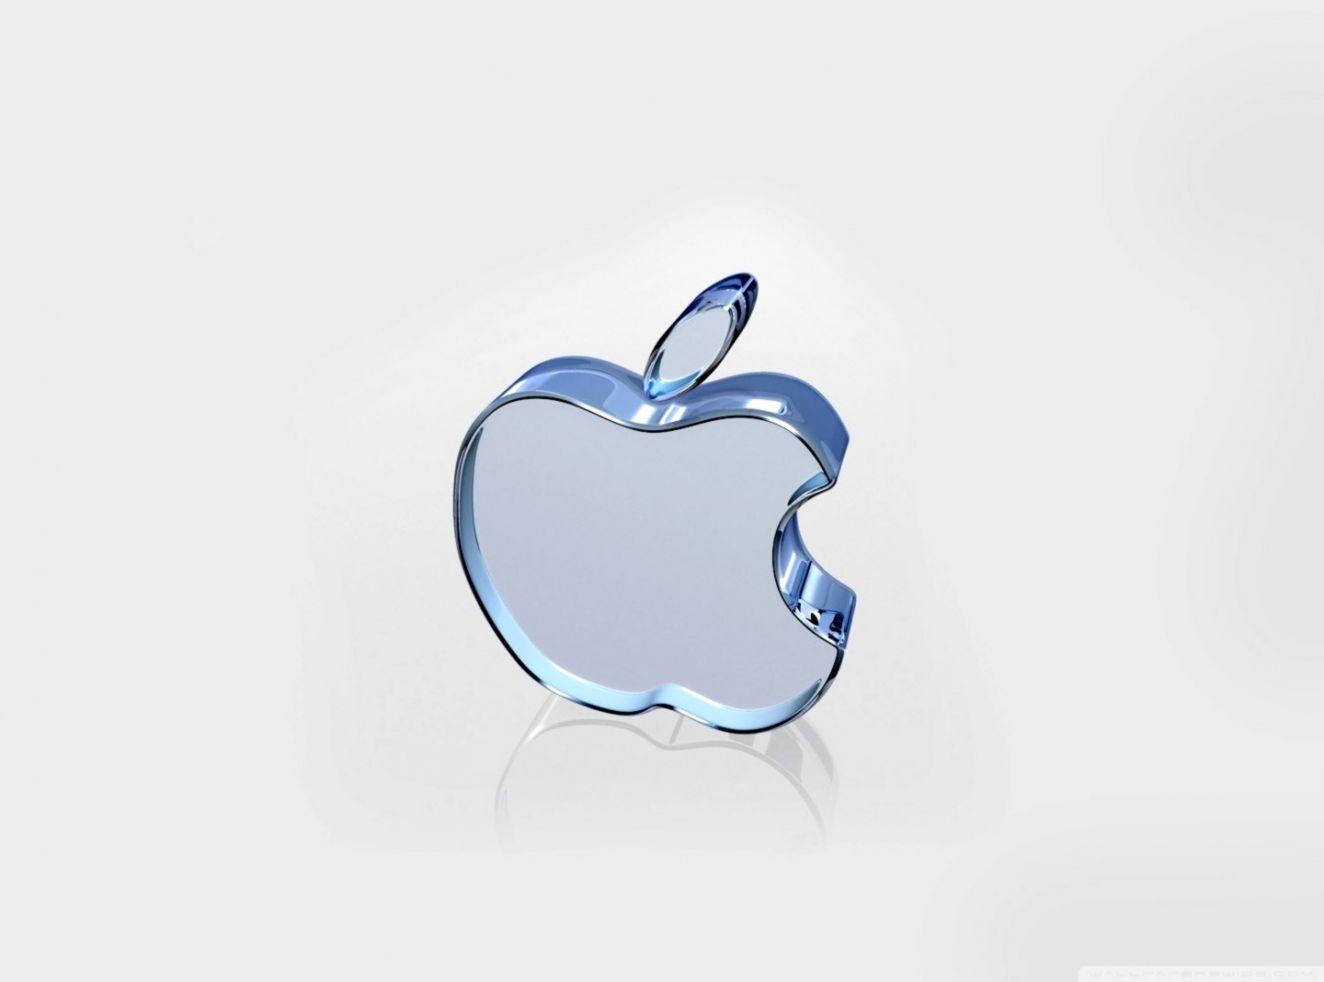 Glass Apple Logo 4k Picture